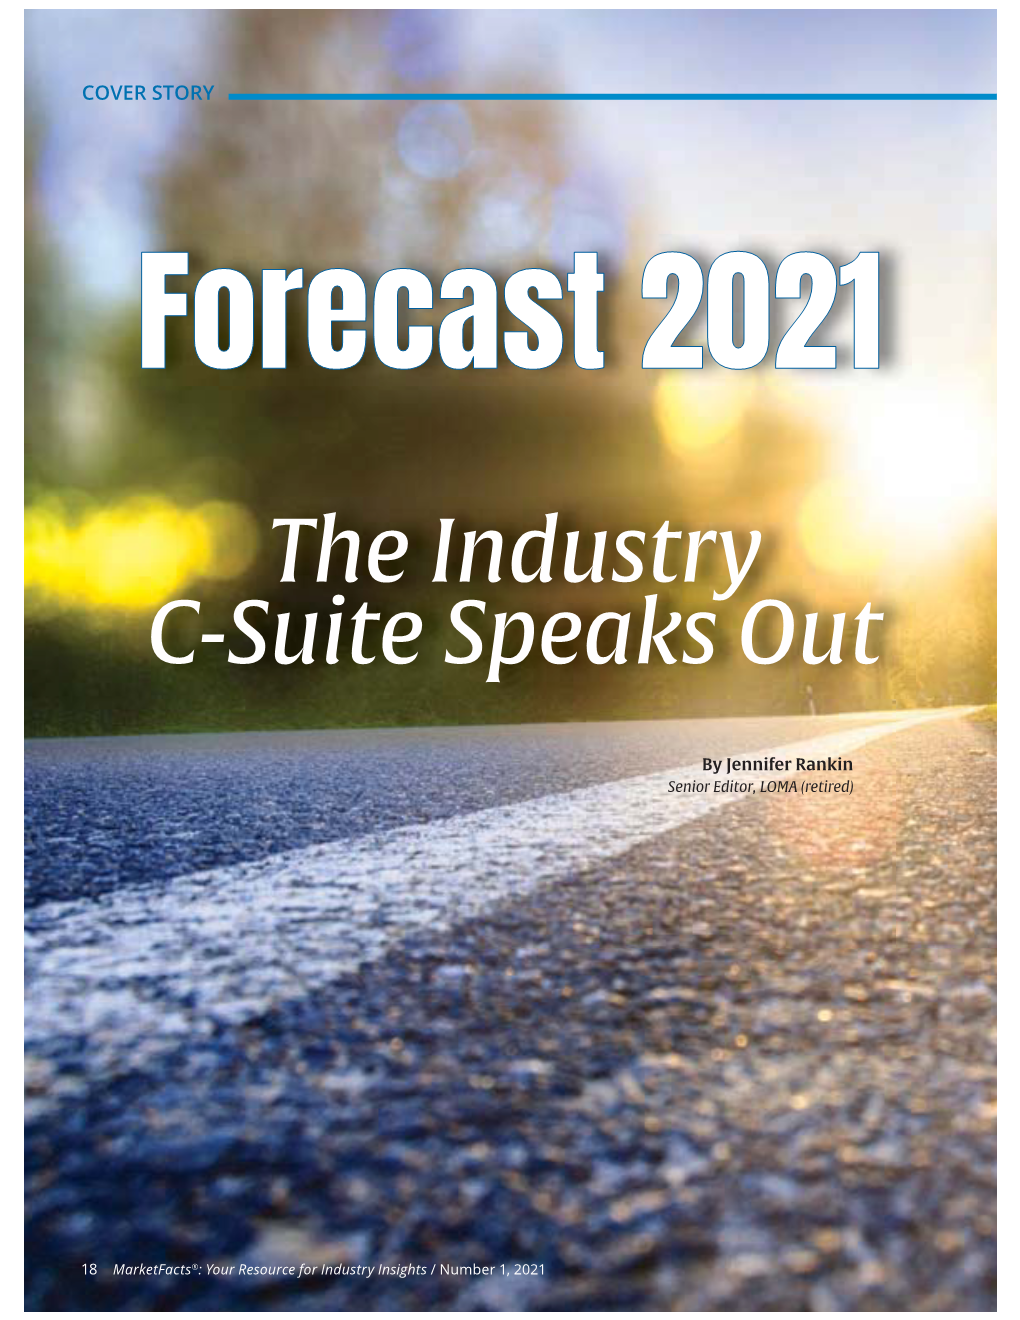 The Industry C-Suite Speaks Out